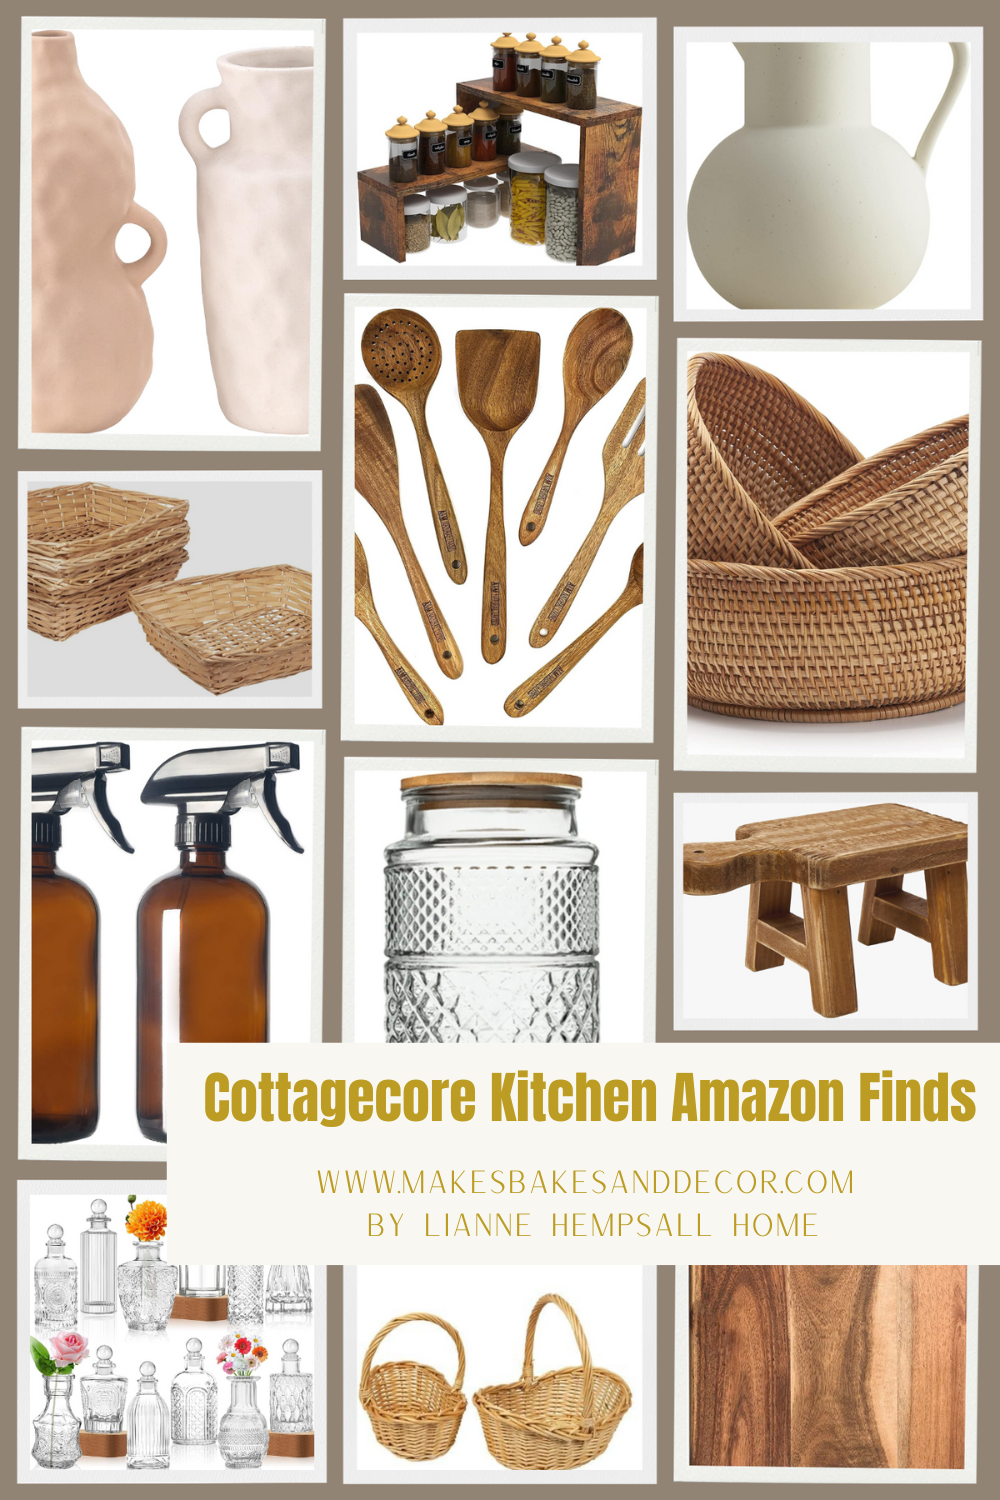 Cottagecore Kitchen  finds - Makes, Bakes and Decor